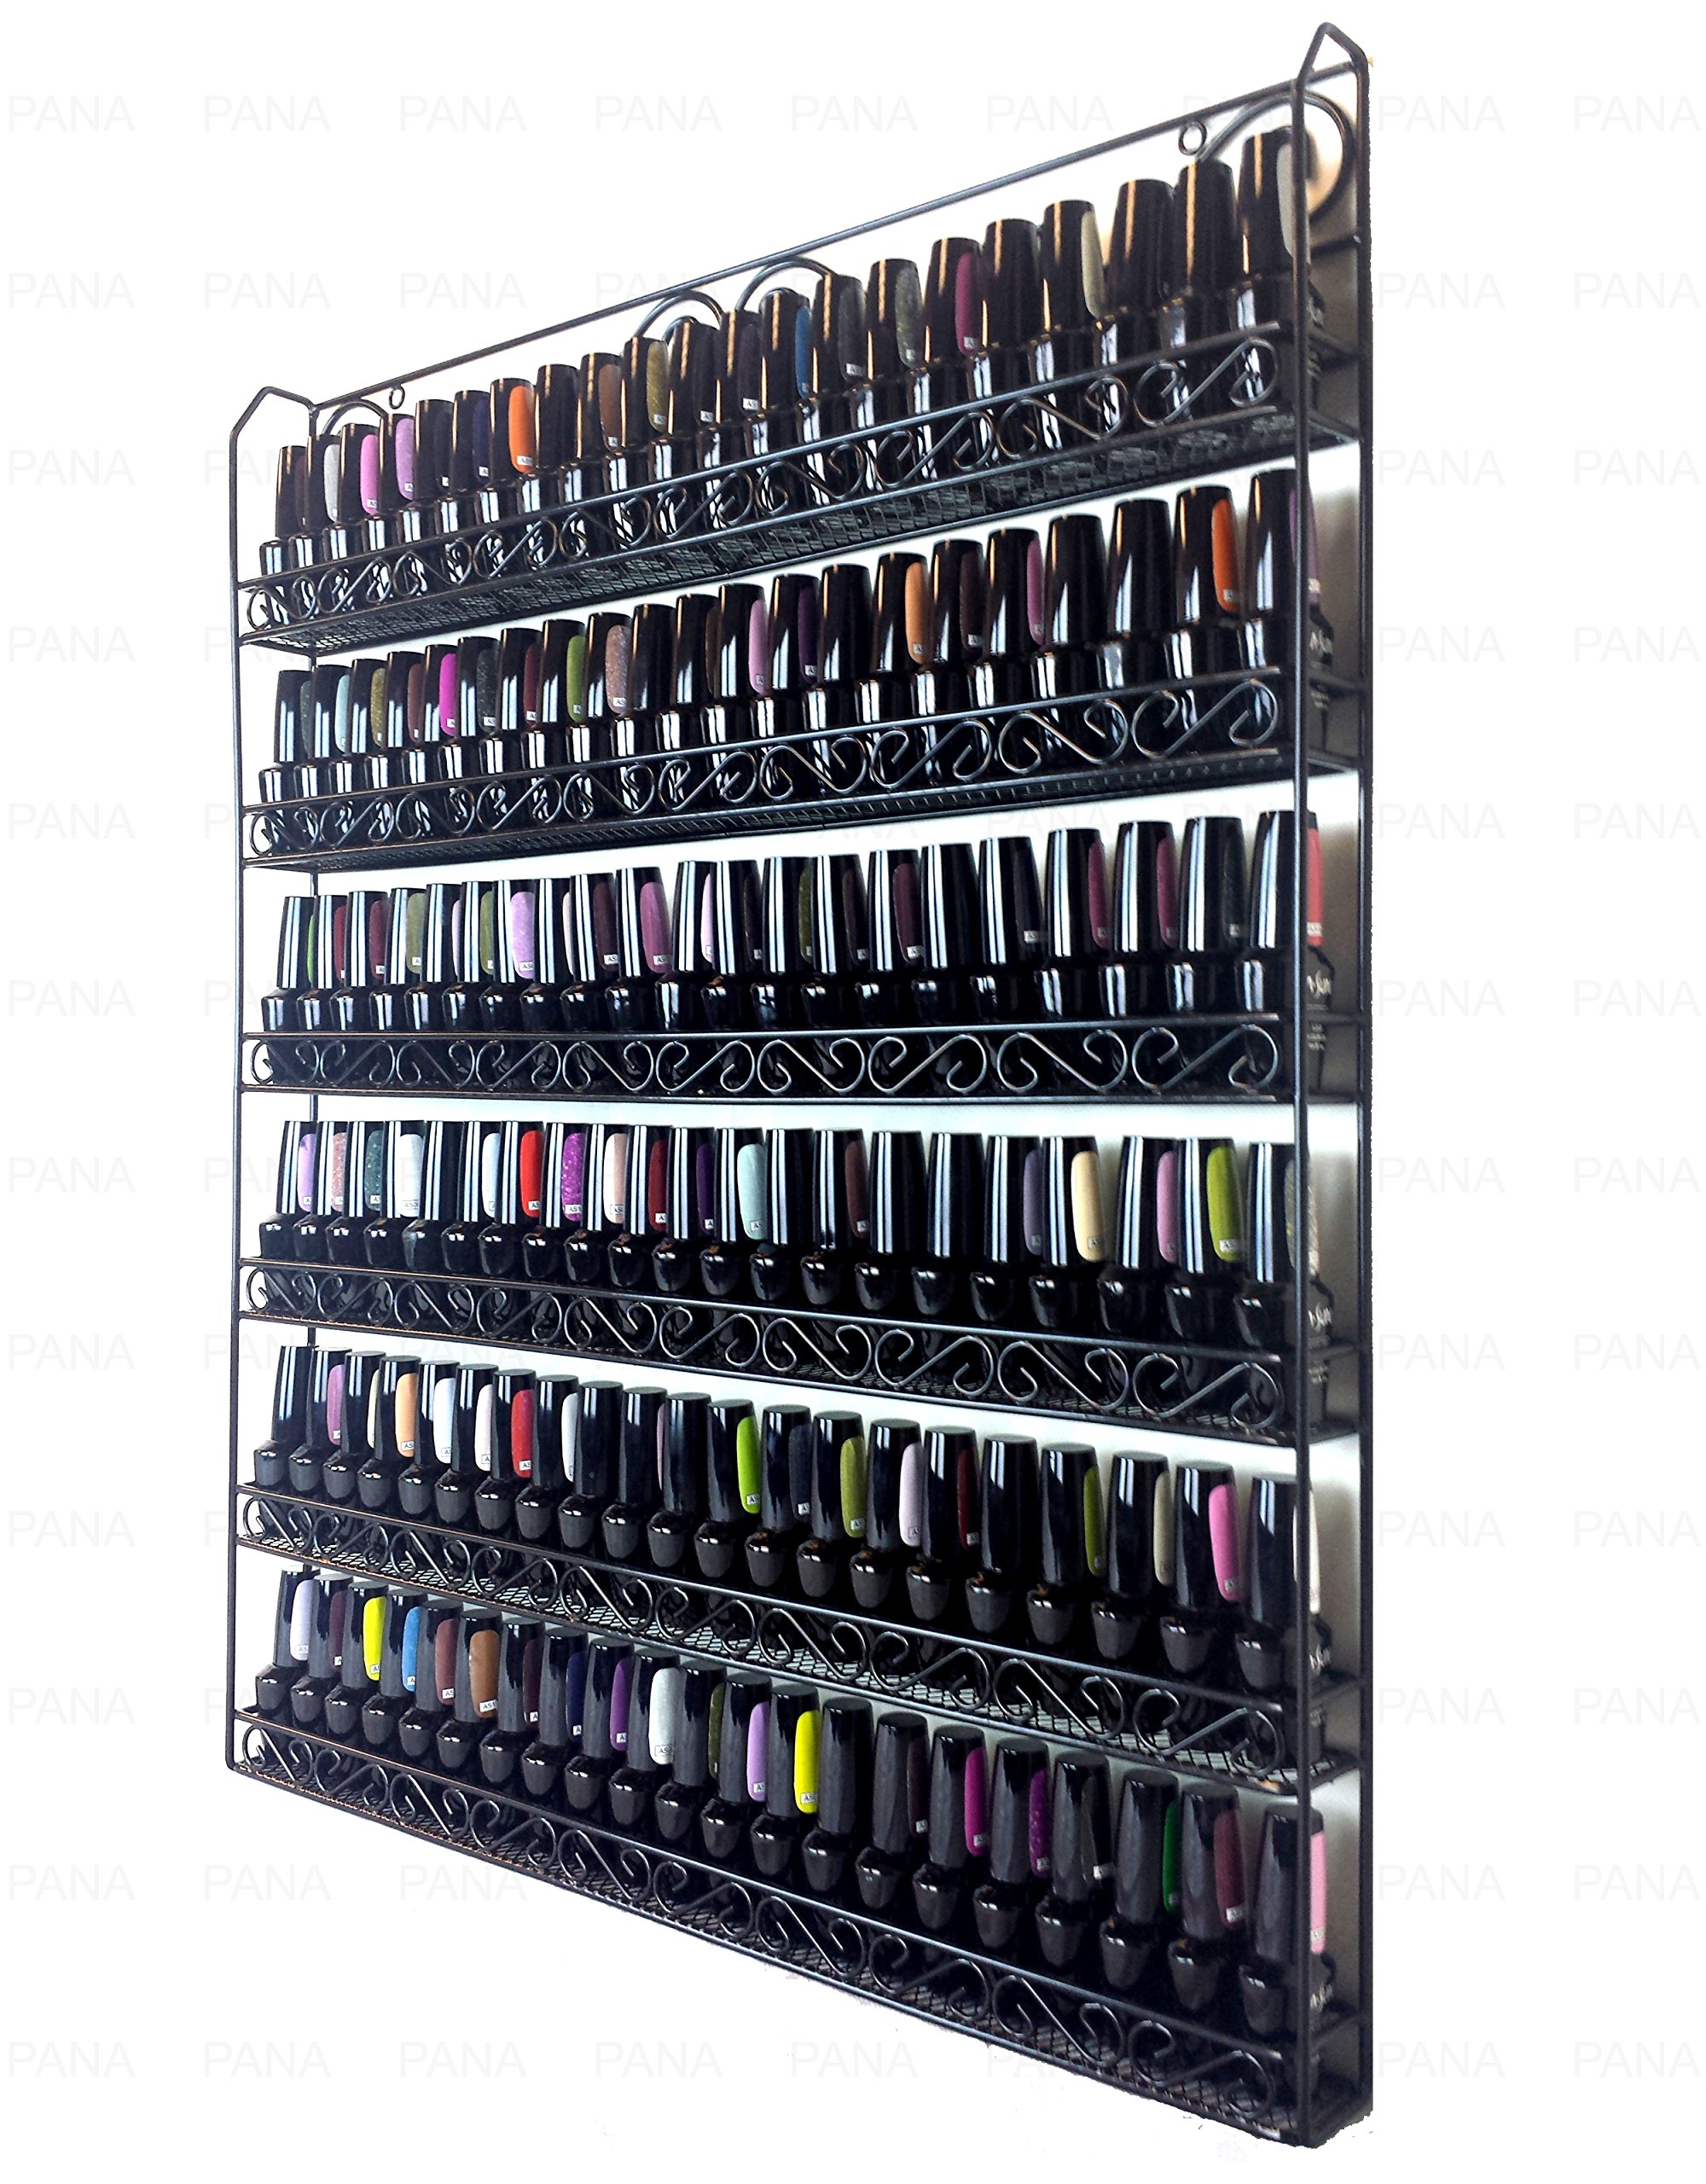 PANA 6 Tier Large Wall Mounted Metal Nail Polish Organizer Rack for Home, Spas, and Busines Salons (Black, 1pc)